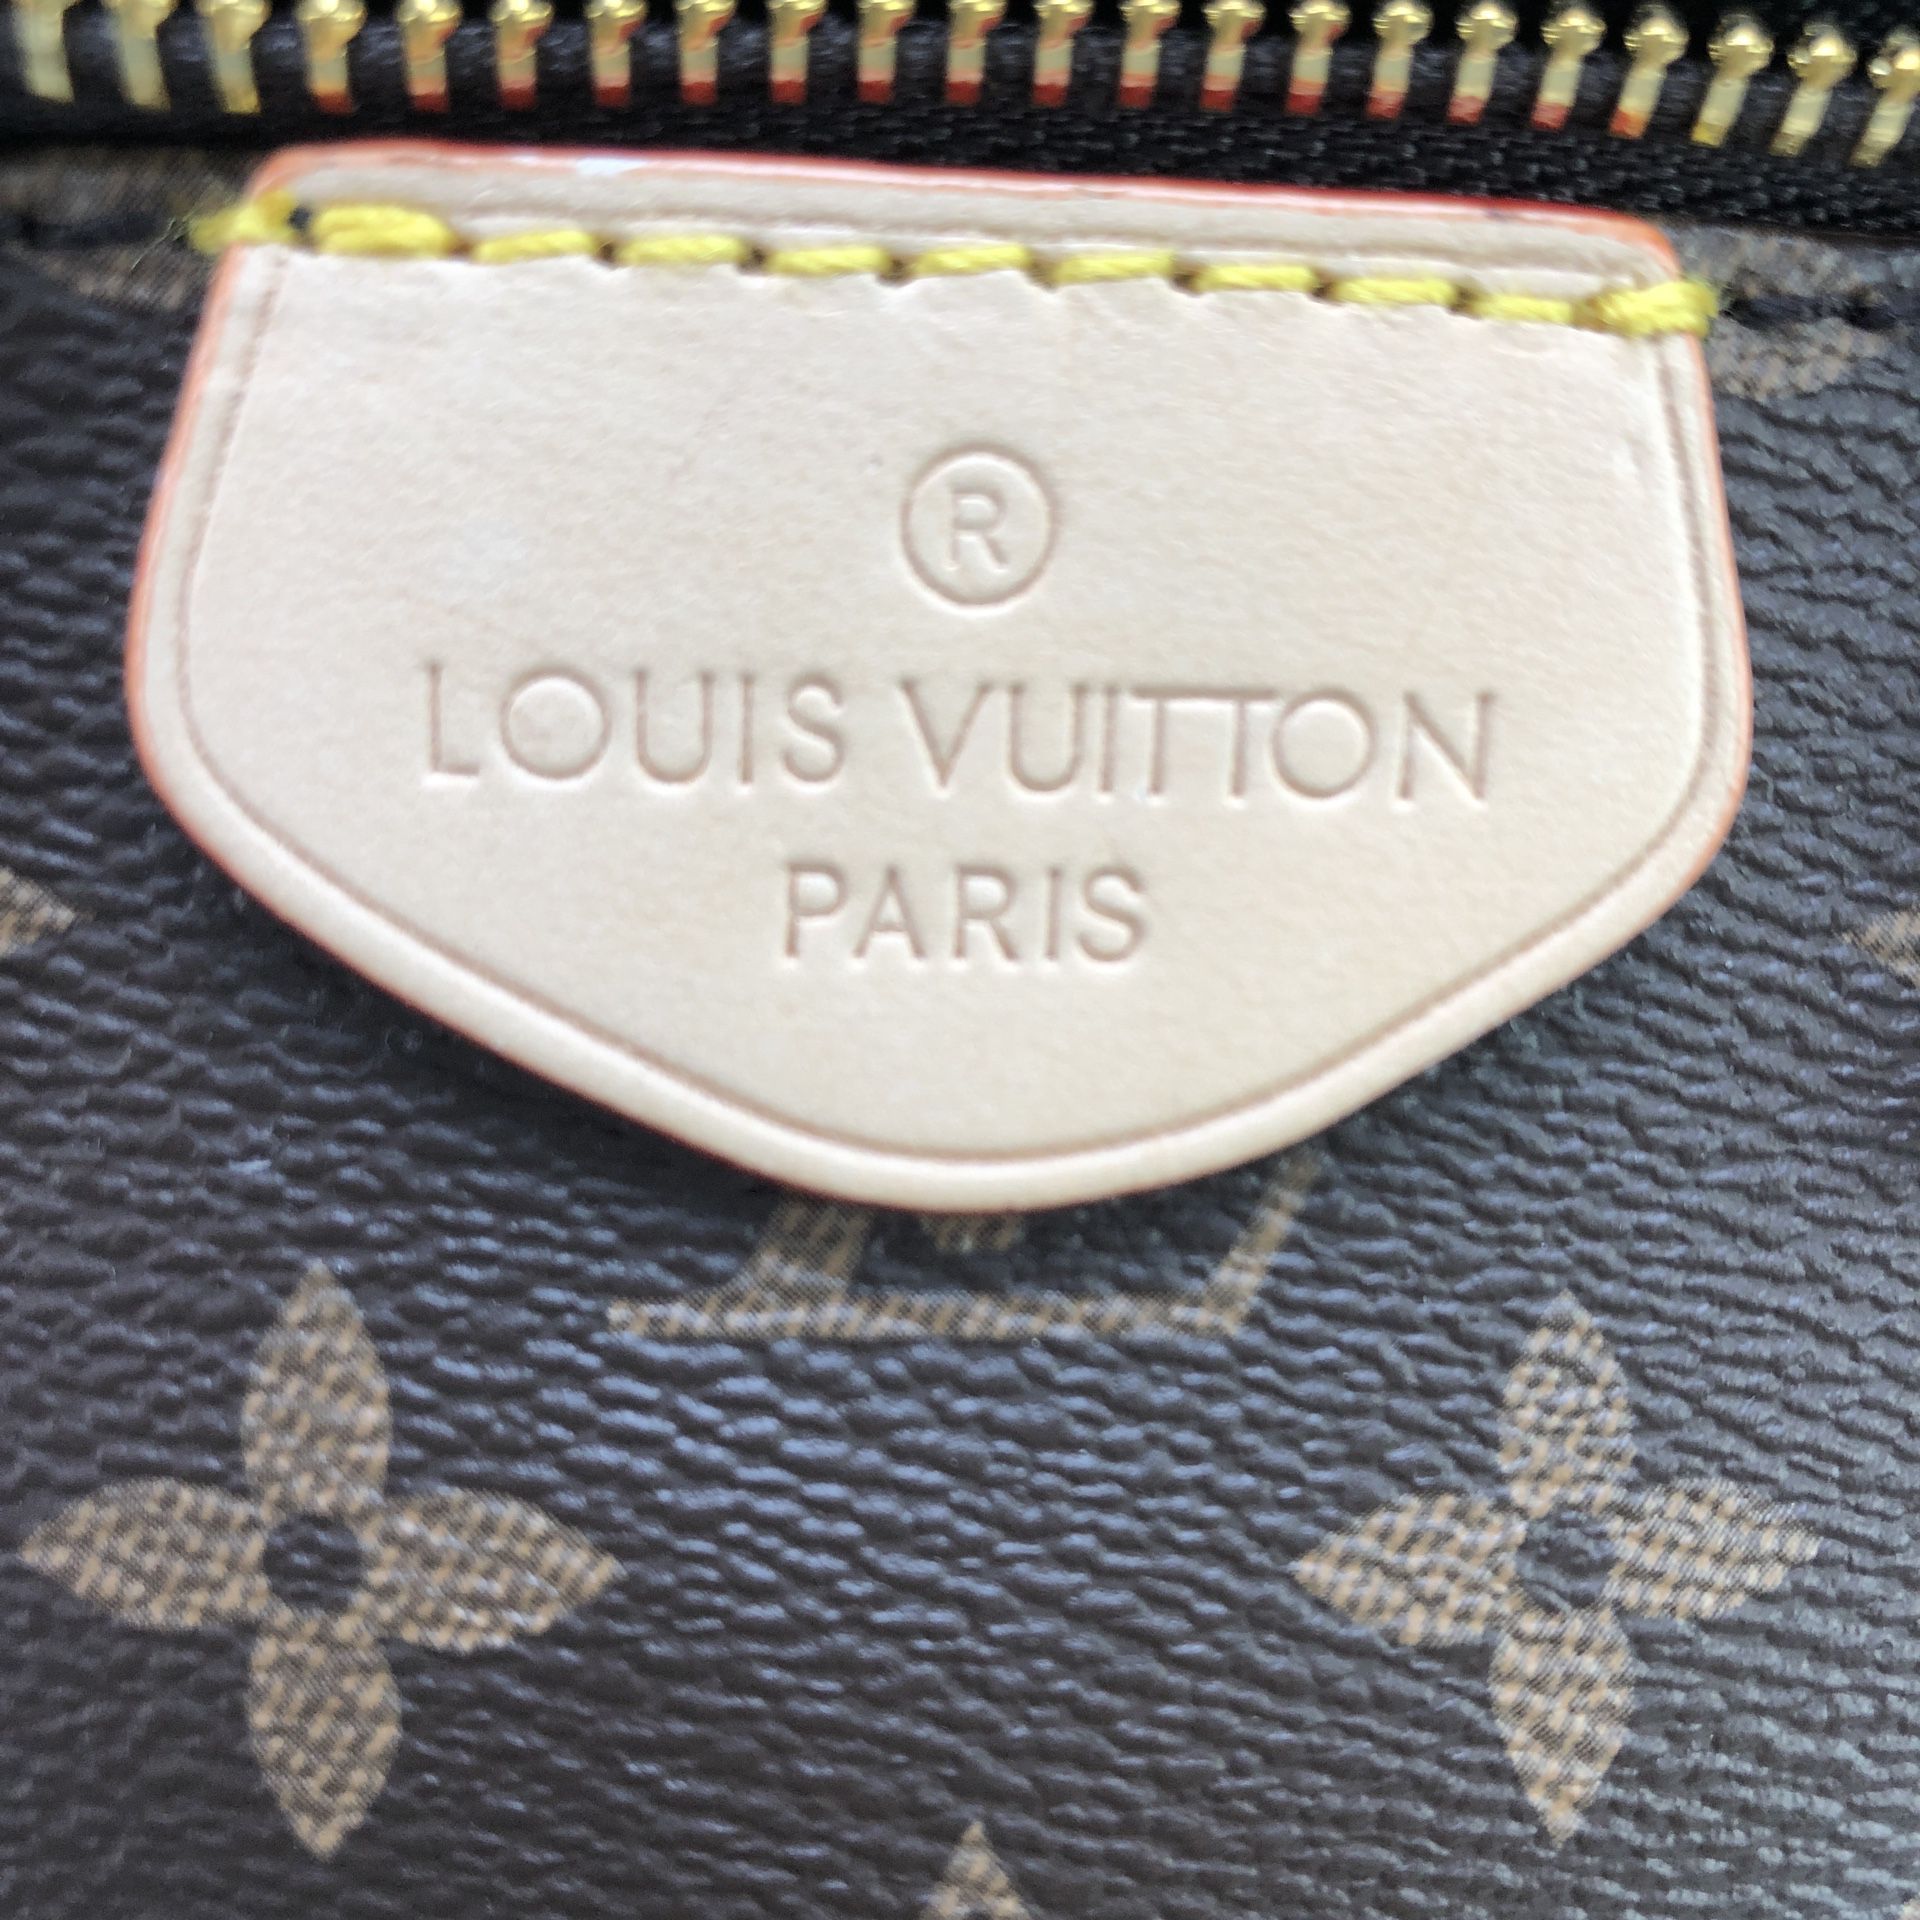 Authentic LOUIS VUITTON Brown Monogram Canvas Bumbag Bag for Sale in Middle  City West, PA - OfferUp